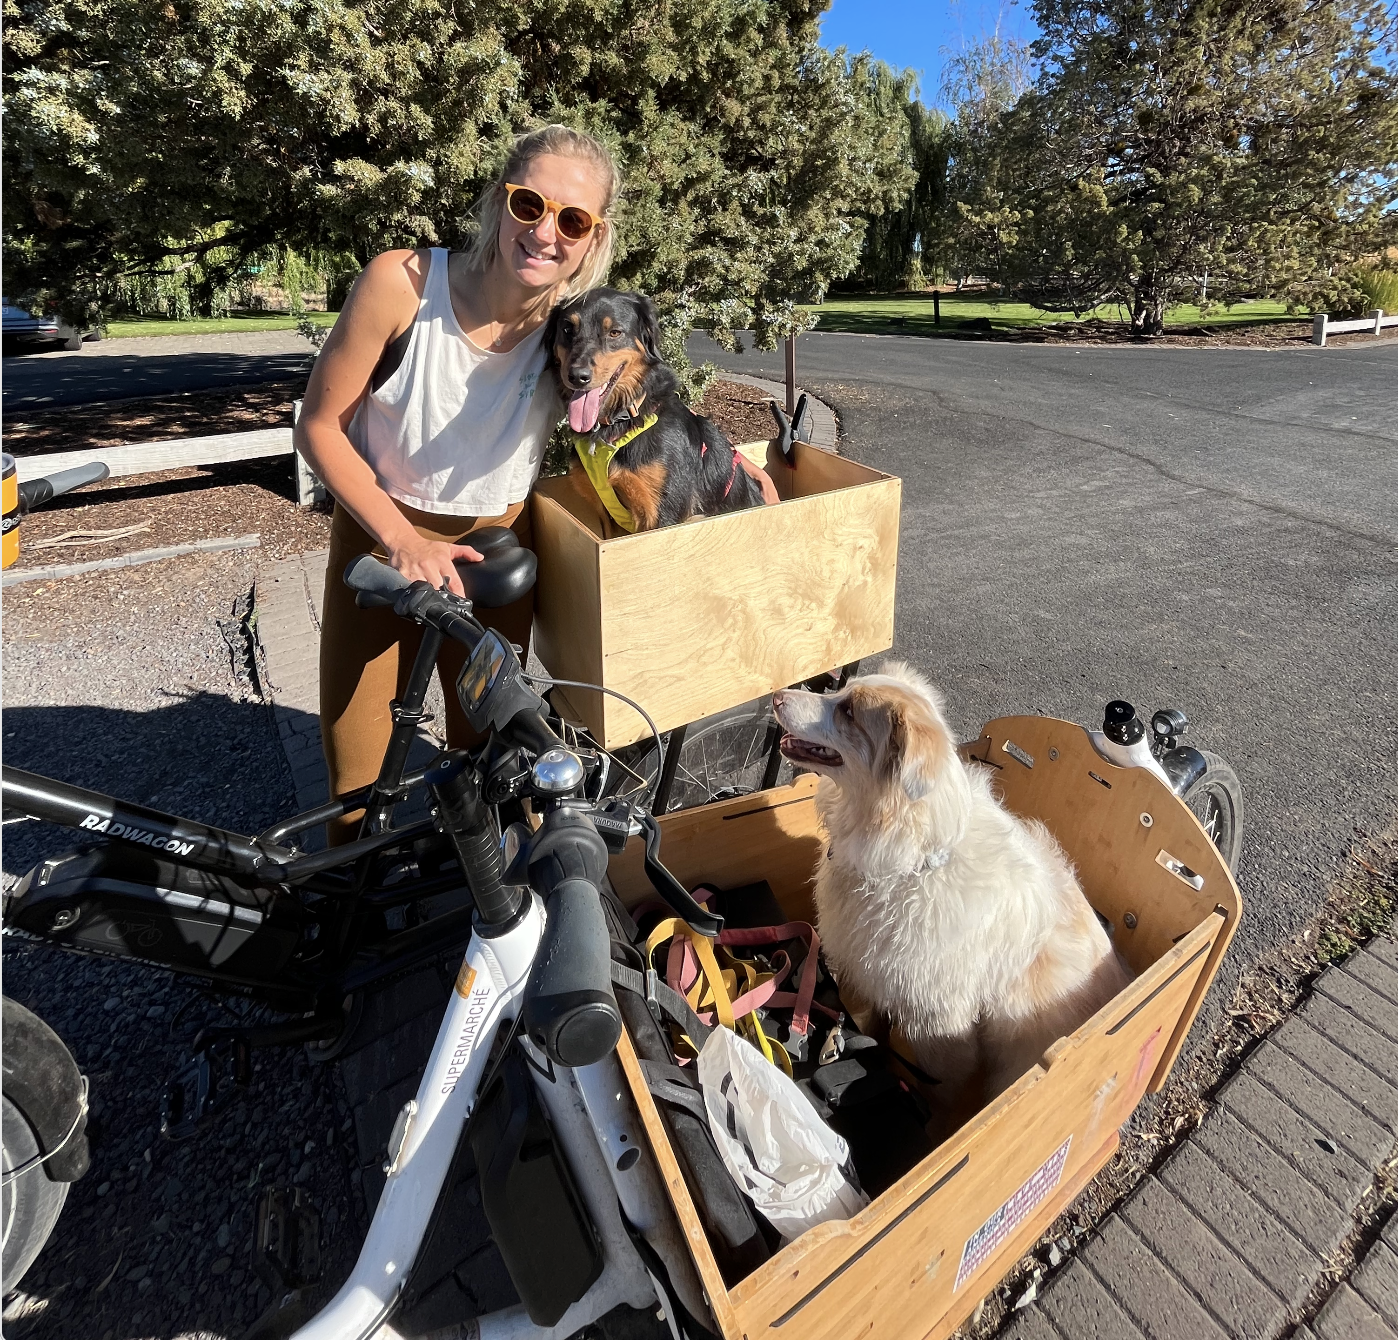 Woman standing next to dog in a bike cargo box - both happy